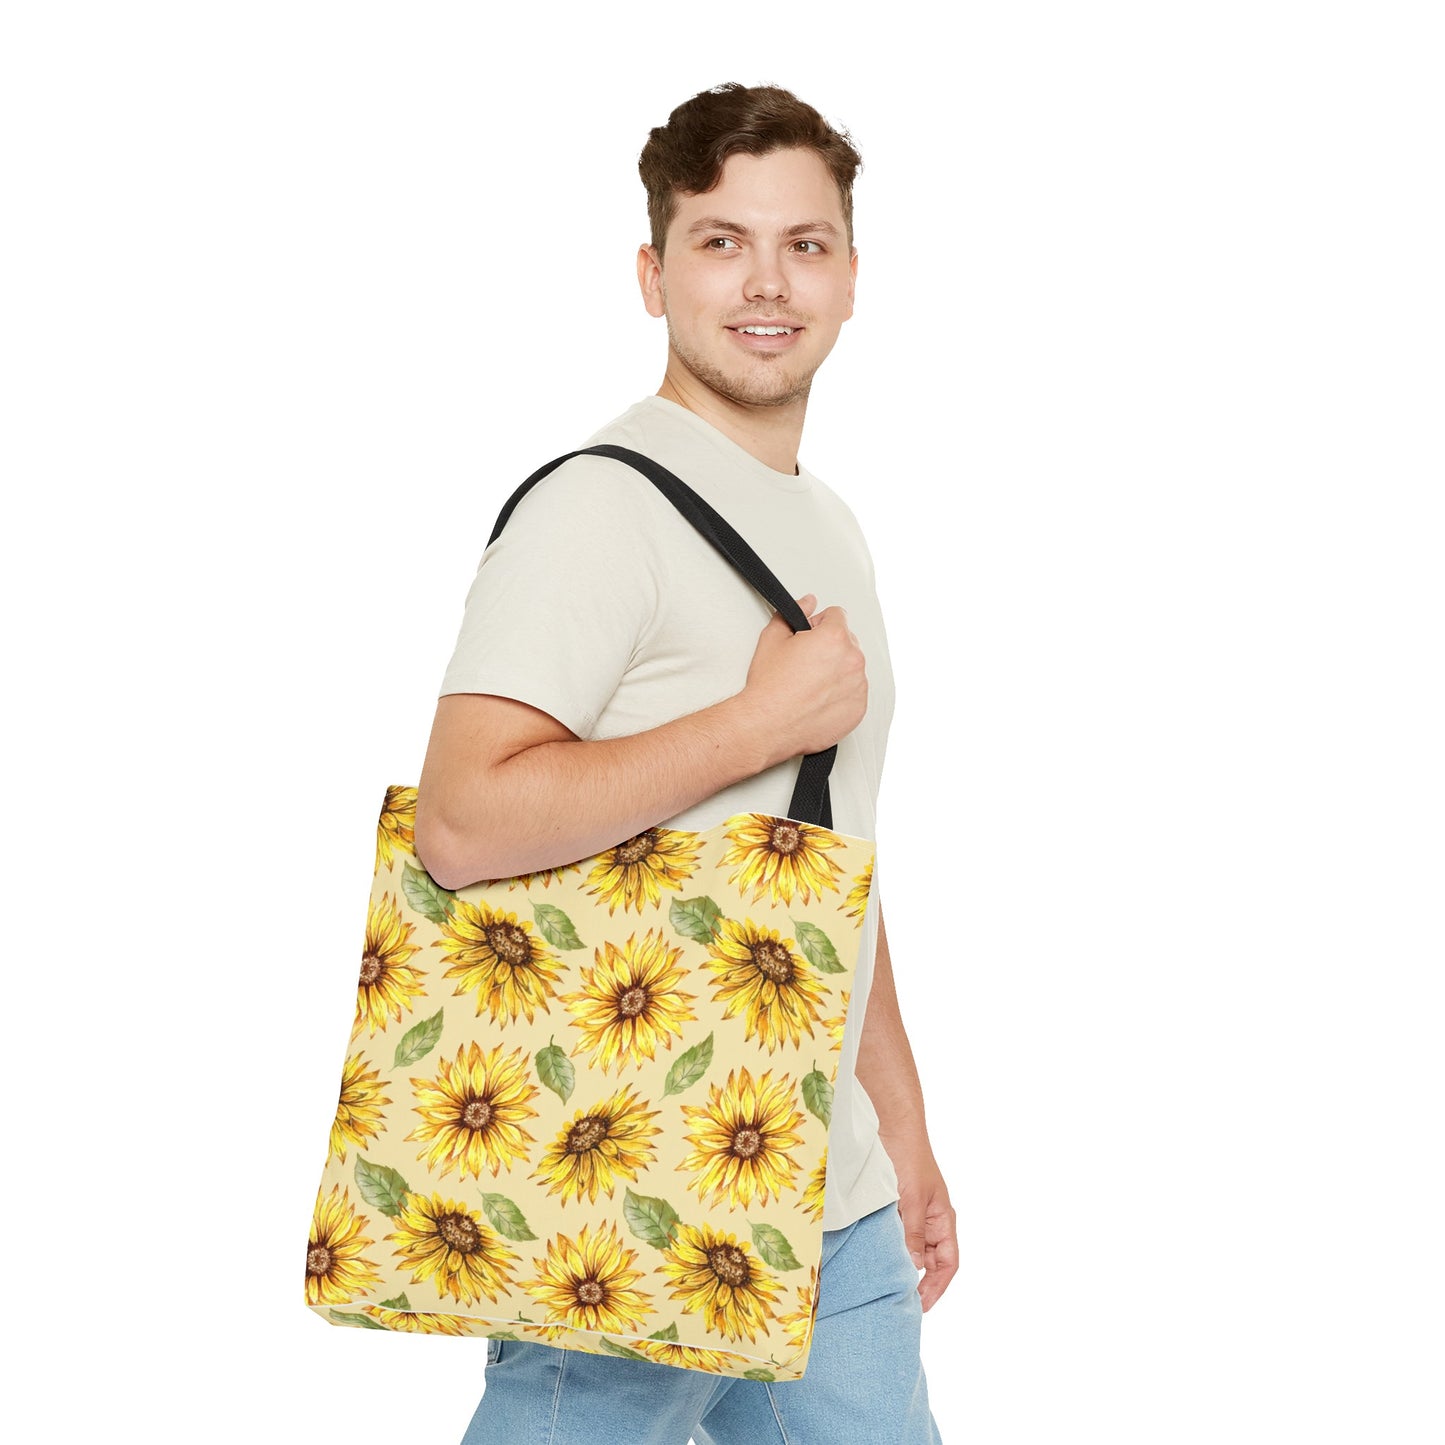 Man in a beige t-shirt and denim carrying a Printify Sunflowers Polyester Tote Bag over his shoulder, smiling at the camera, isolated on a white background.